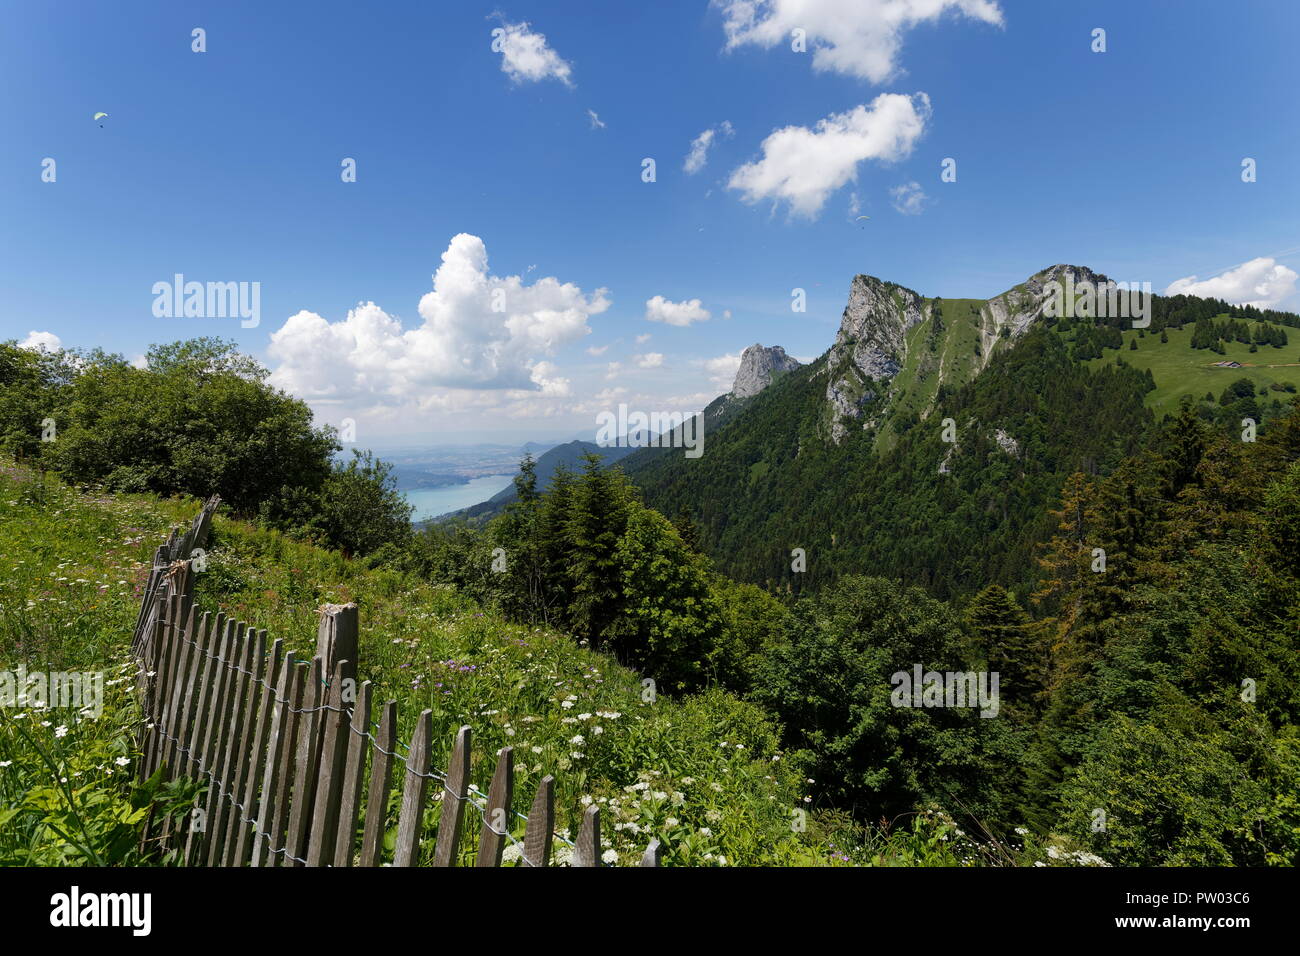 Meadow flowers and wooden picket fence with paragliders Lake Annecy and mountains in the distant from the hills around Col de la Forclaz France Stock Photo